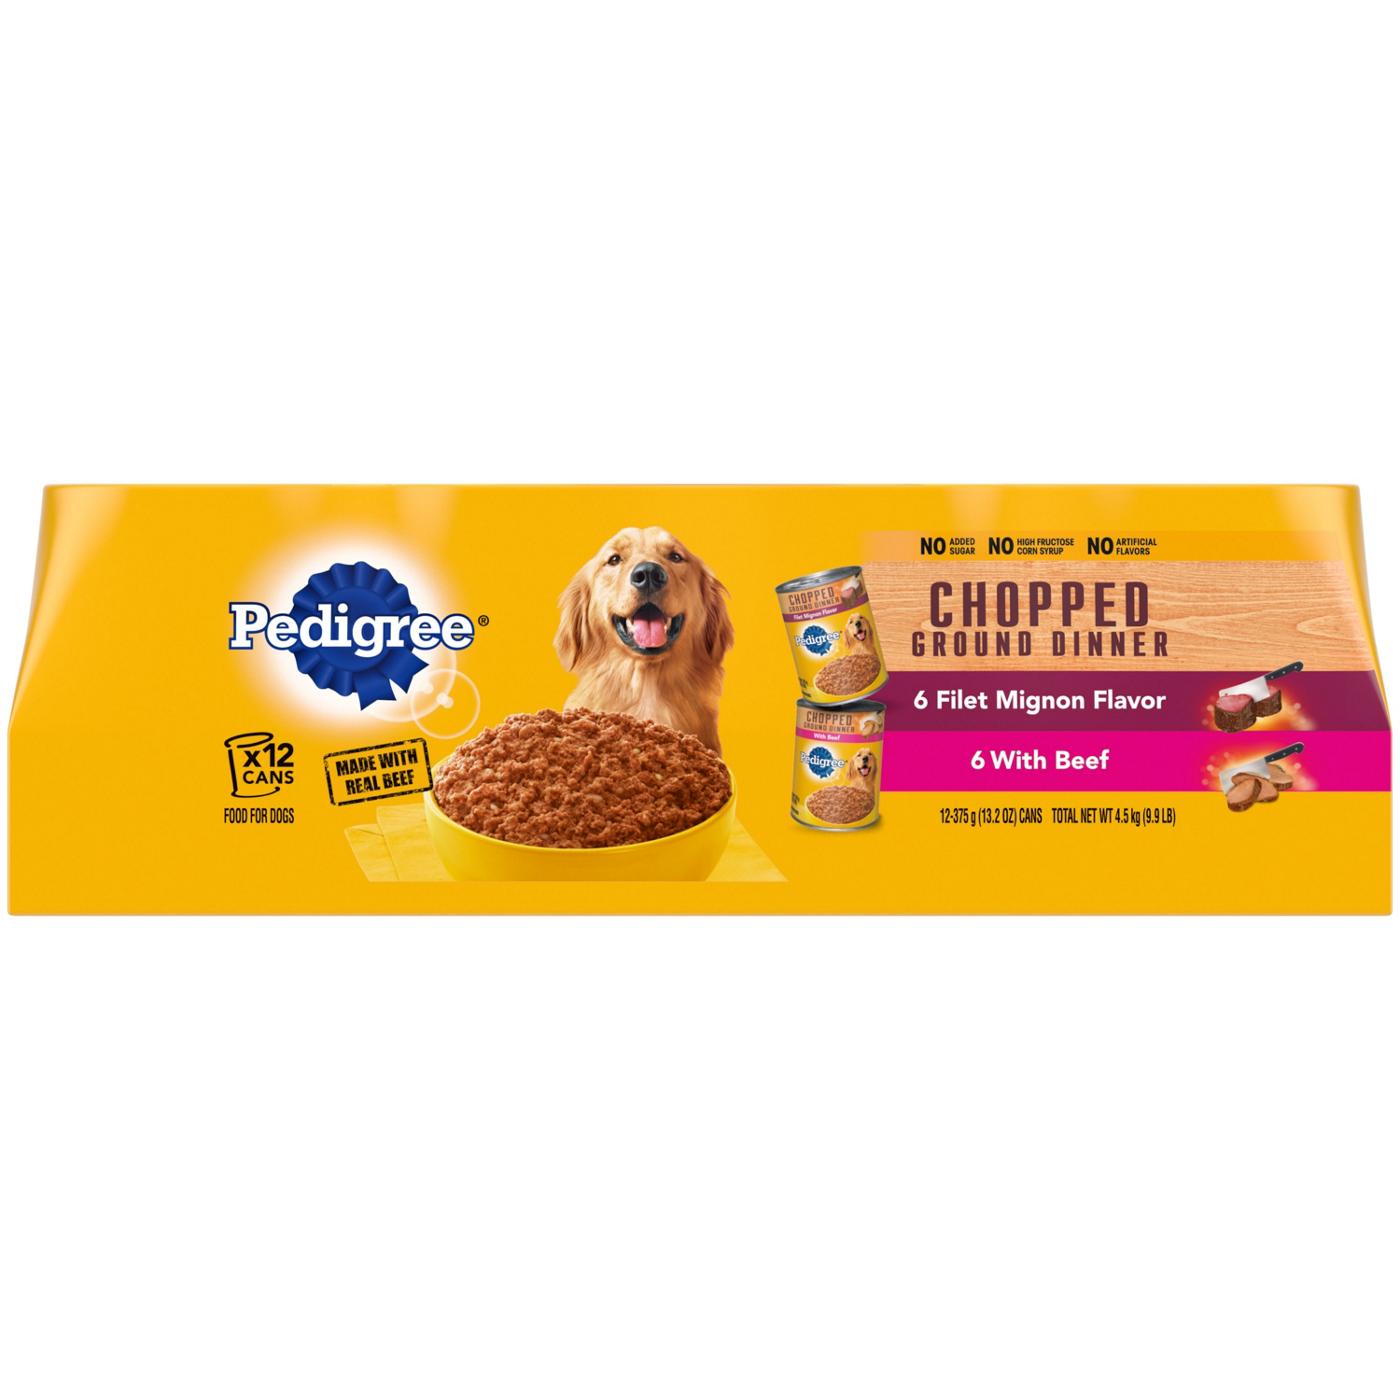 Pedigree Chopped Ground Dinner Filet Mignon & Beef Wet Dog Food Variety Pack; image 1 of 5